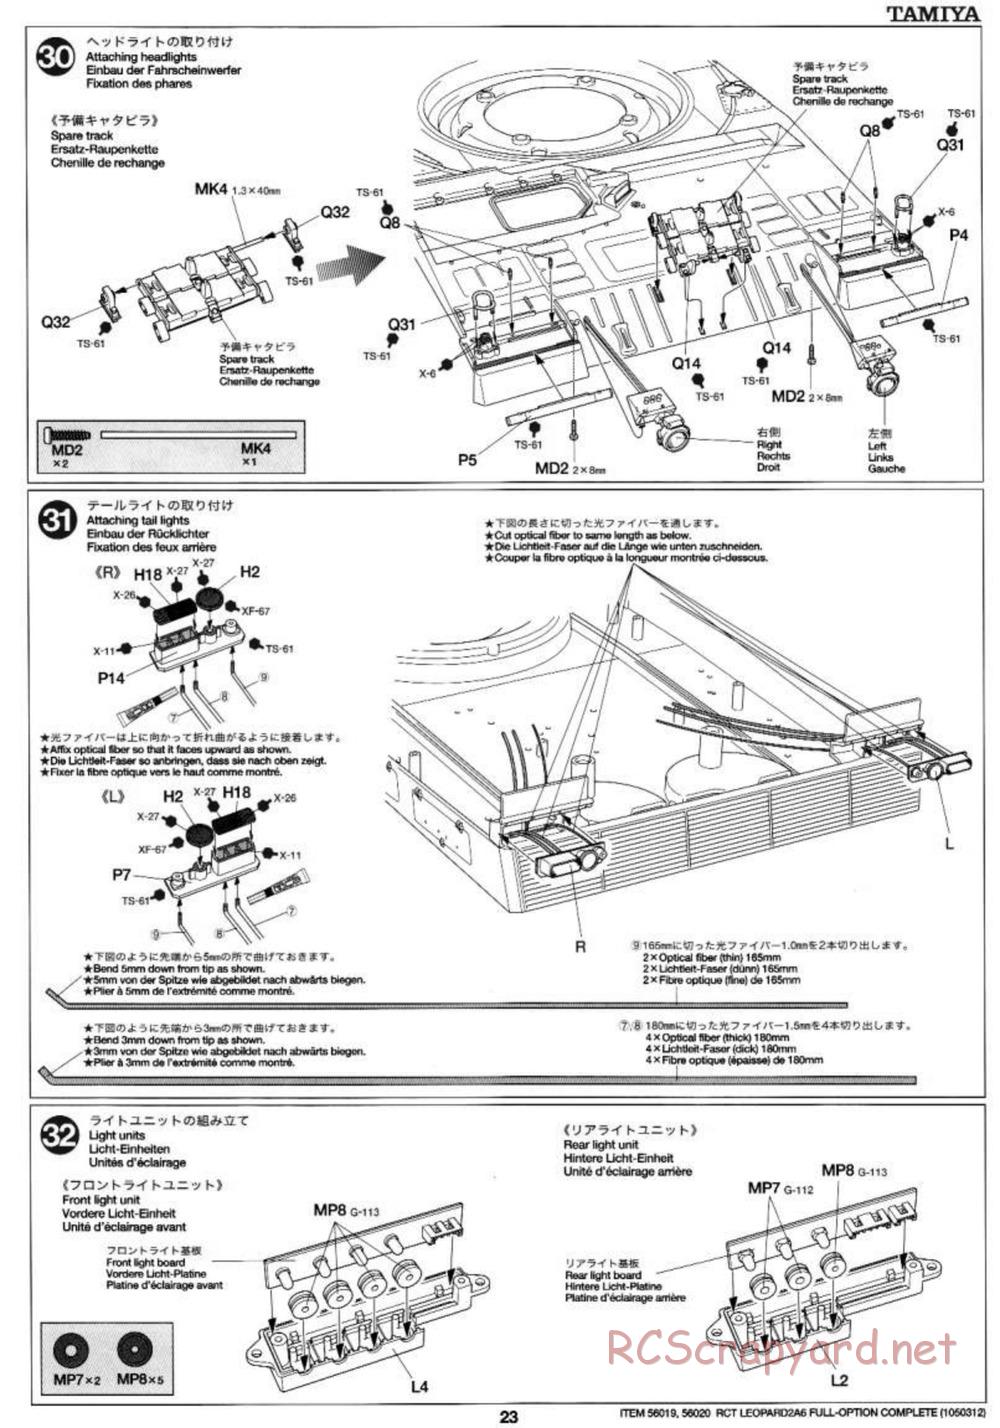 Tamiya - Leopard 2 A6 - 1/16 Scale Chassis - Manual - Page 23